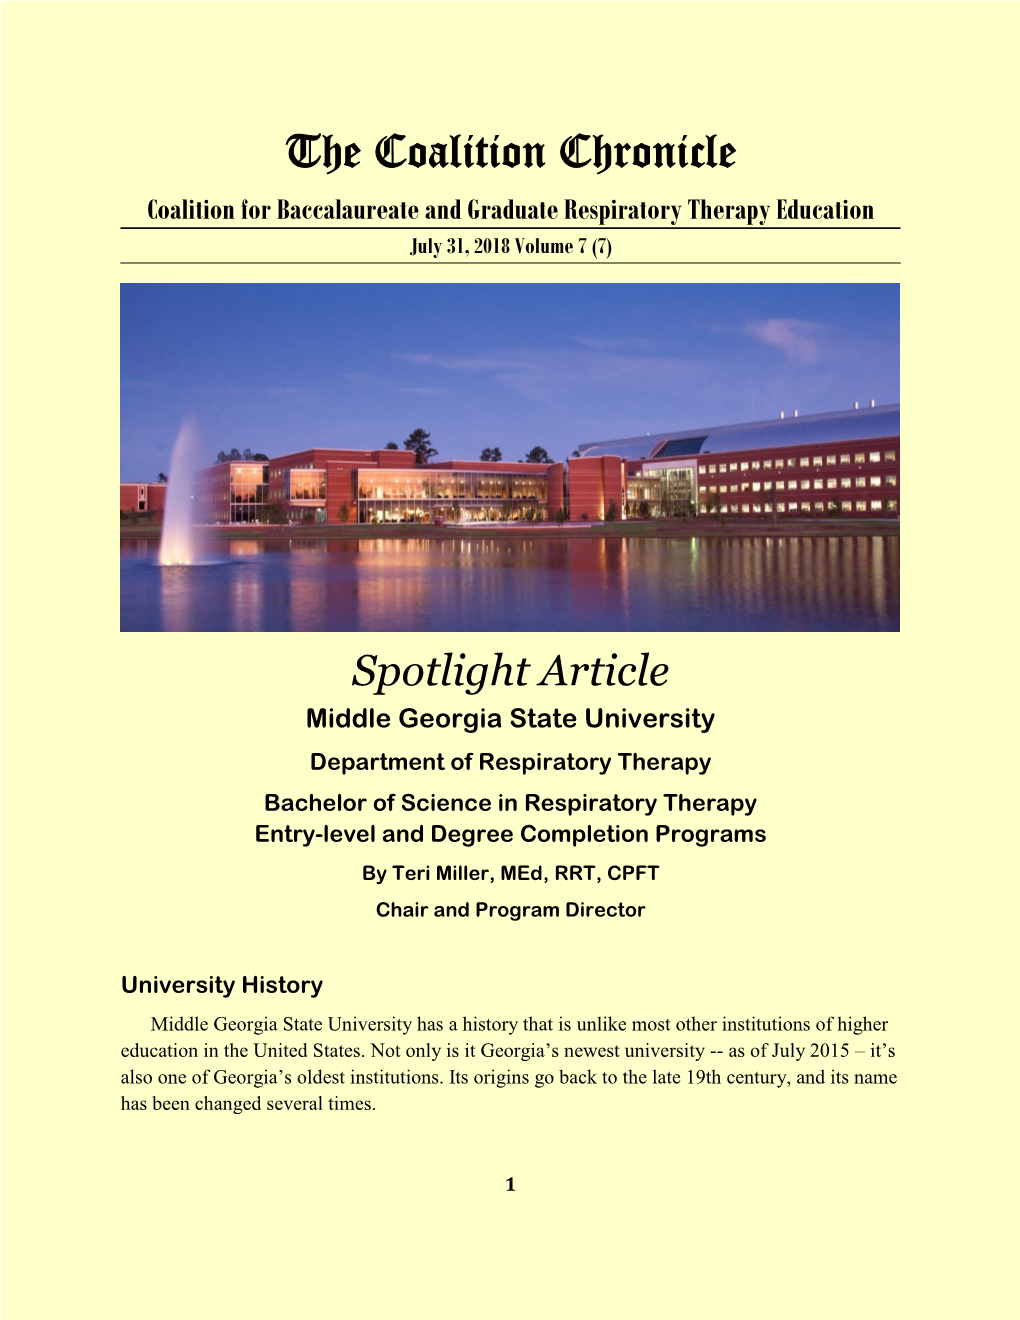 The Coalition Chronicle Coalition for Baccalaureate and Graduate Respiratory Therapy Education July 31, 2018 Volume 7 (7)